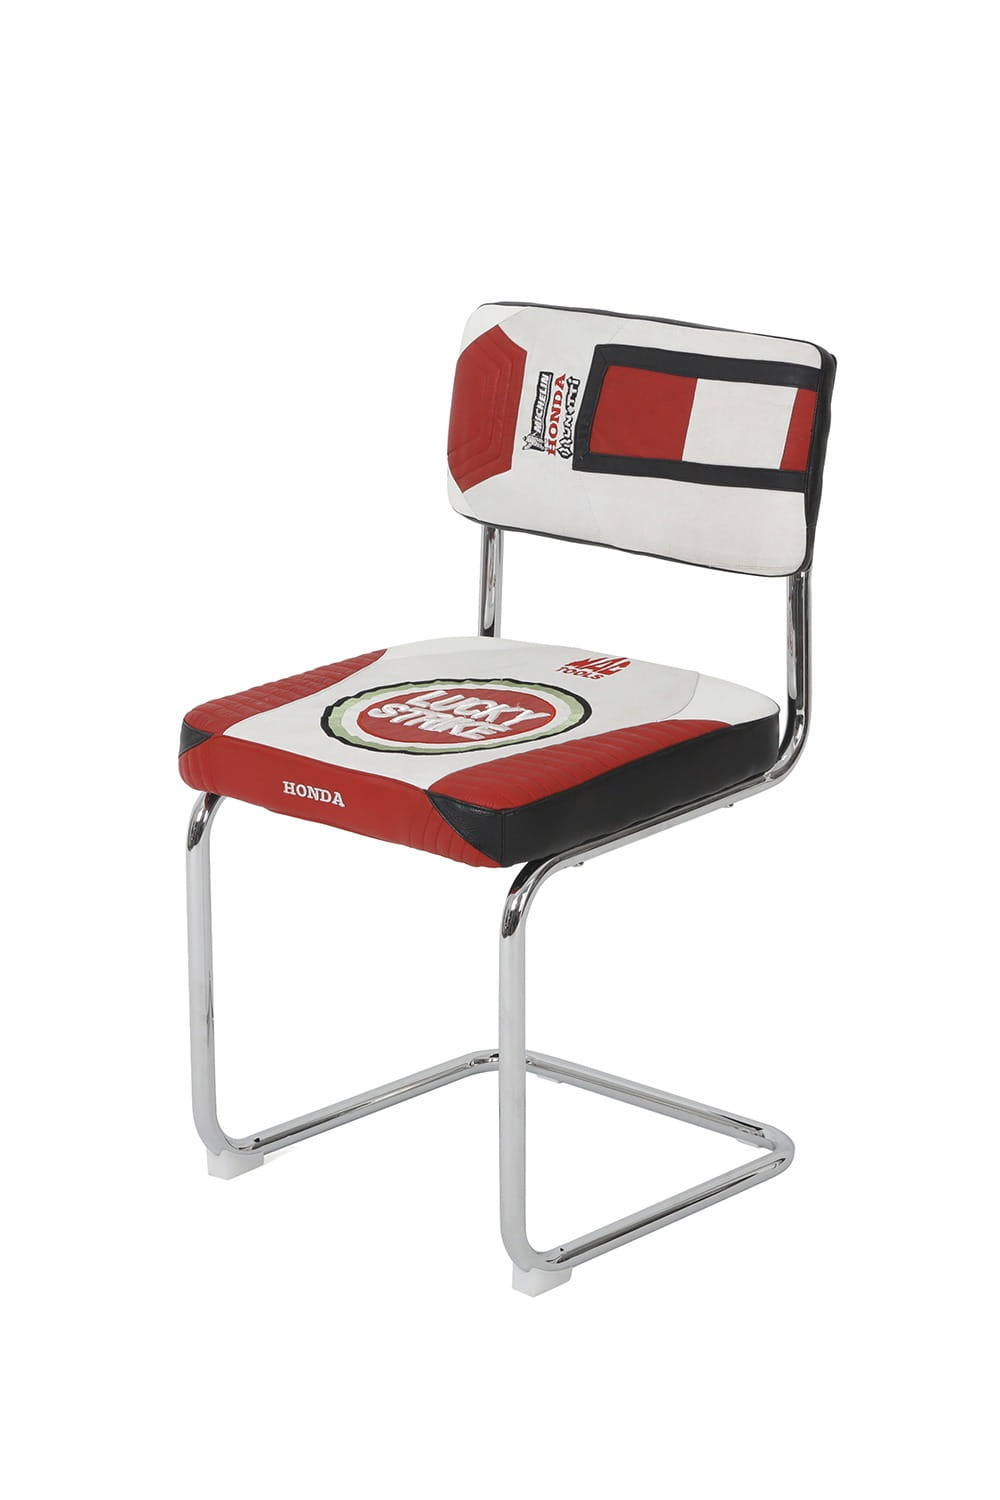 Chair C2 type 006 - Deconstructed Lucky Strike Racing Jacket Single Chair